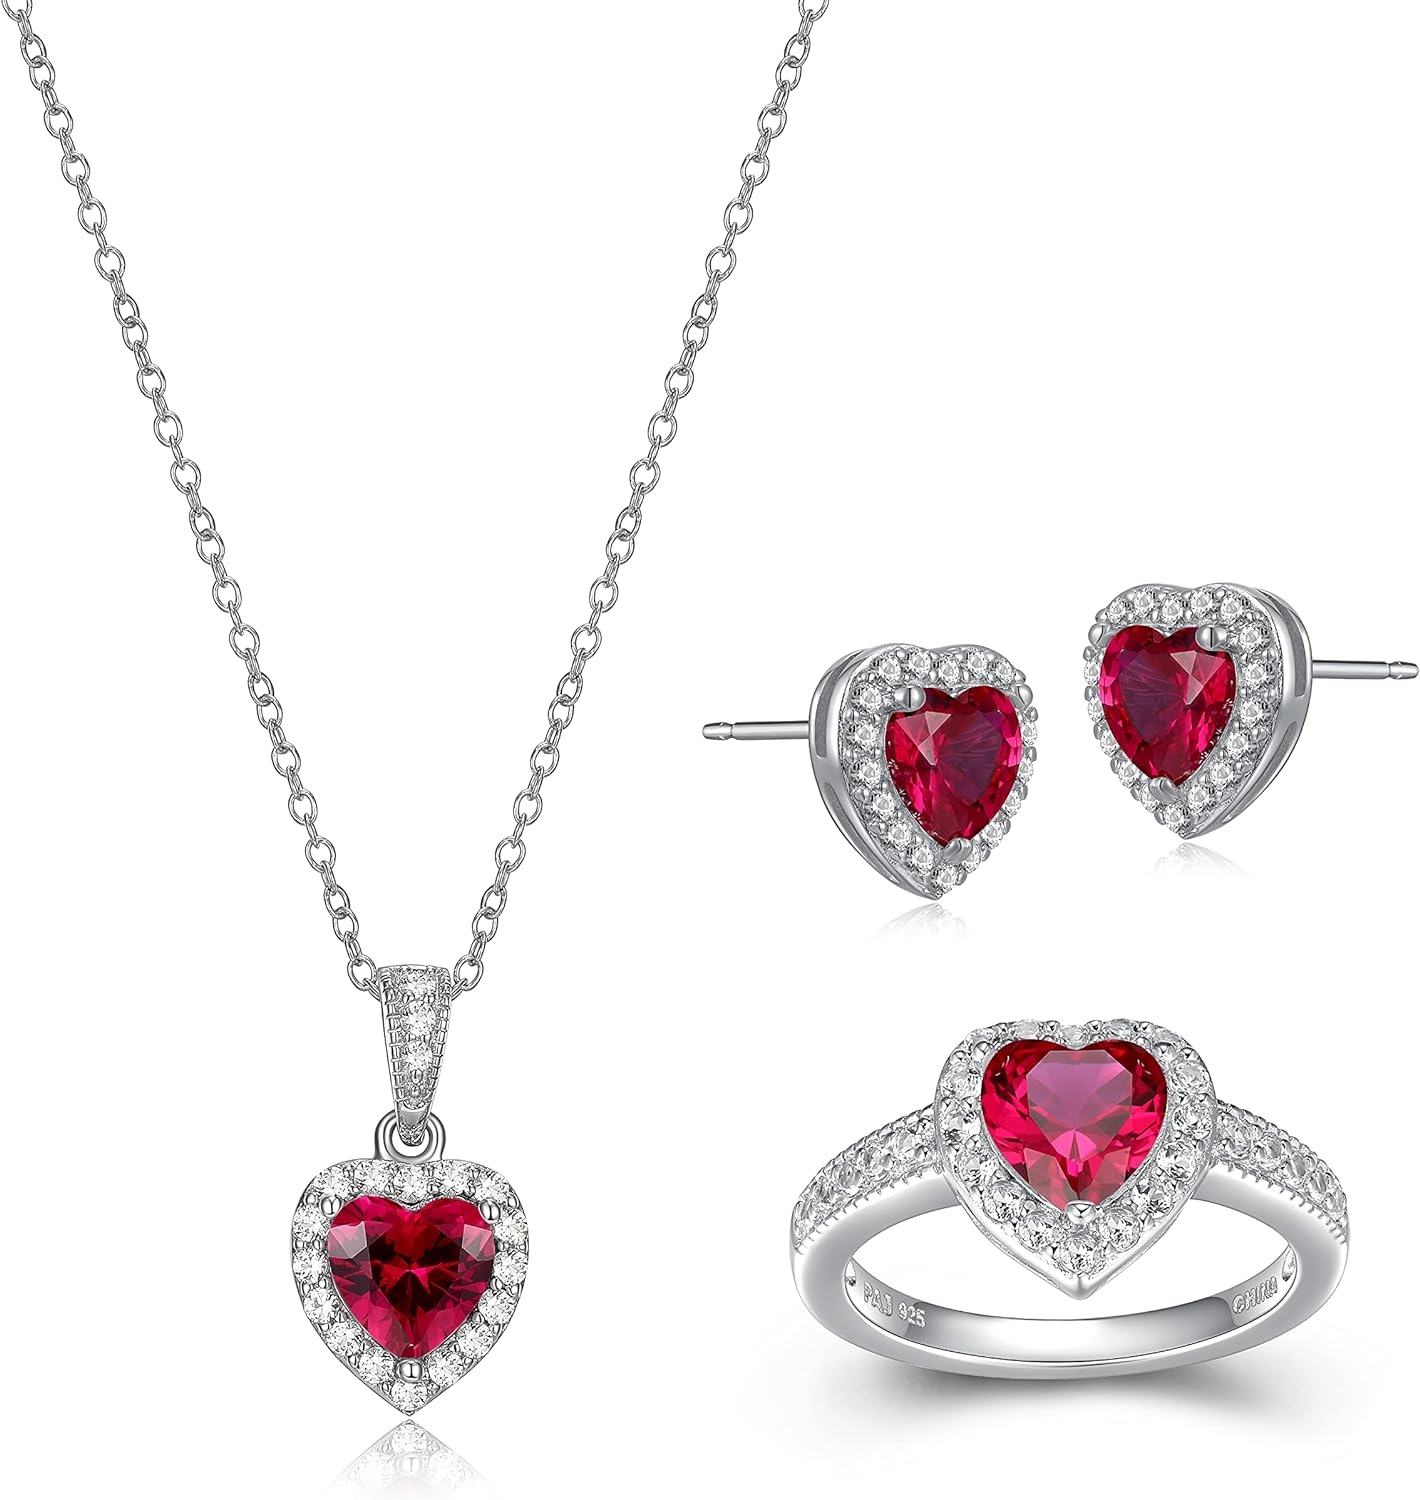 MORGAN PAIGE .925 Sterling Silver Gemstone and White Sapphire Halo Heart Pendant Necklace, Stud Earrings, and Size 7 Ring Set - Choice of Birthstone Colors